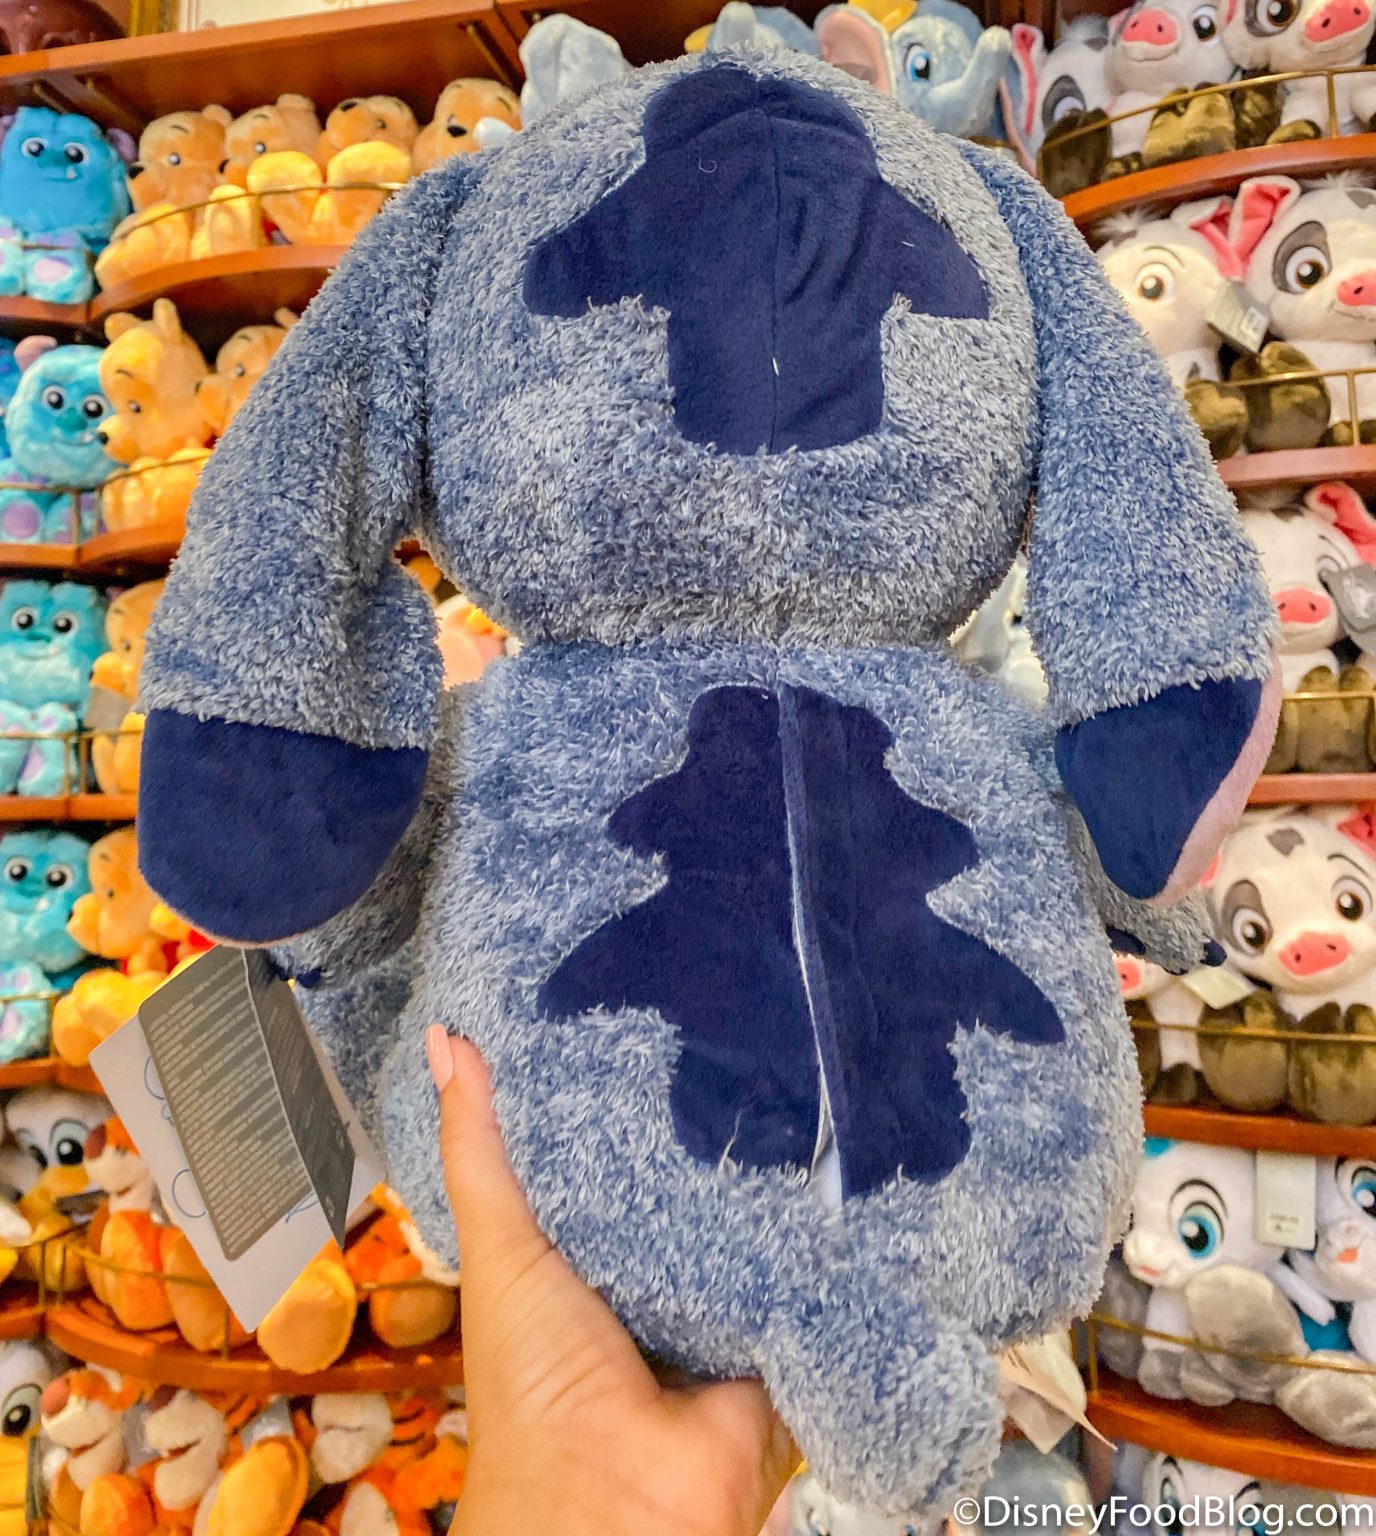 Love Weighted Blankets? Then You'll Want to See Disney World's Newest